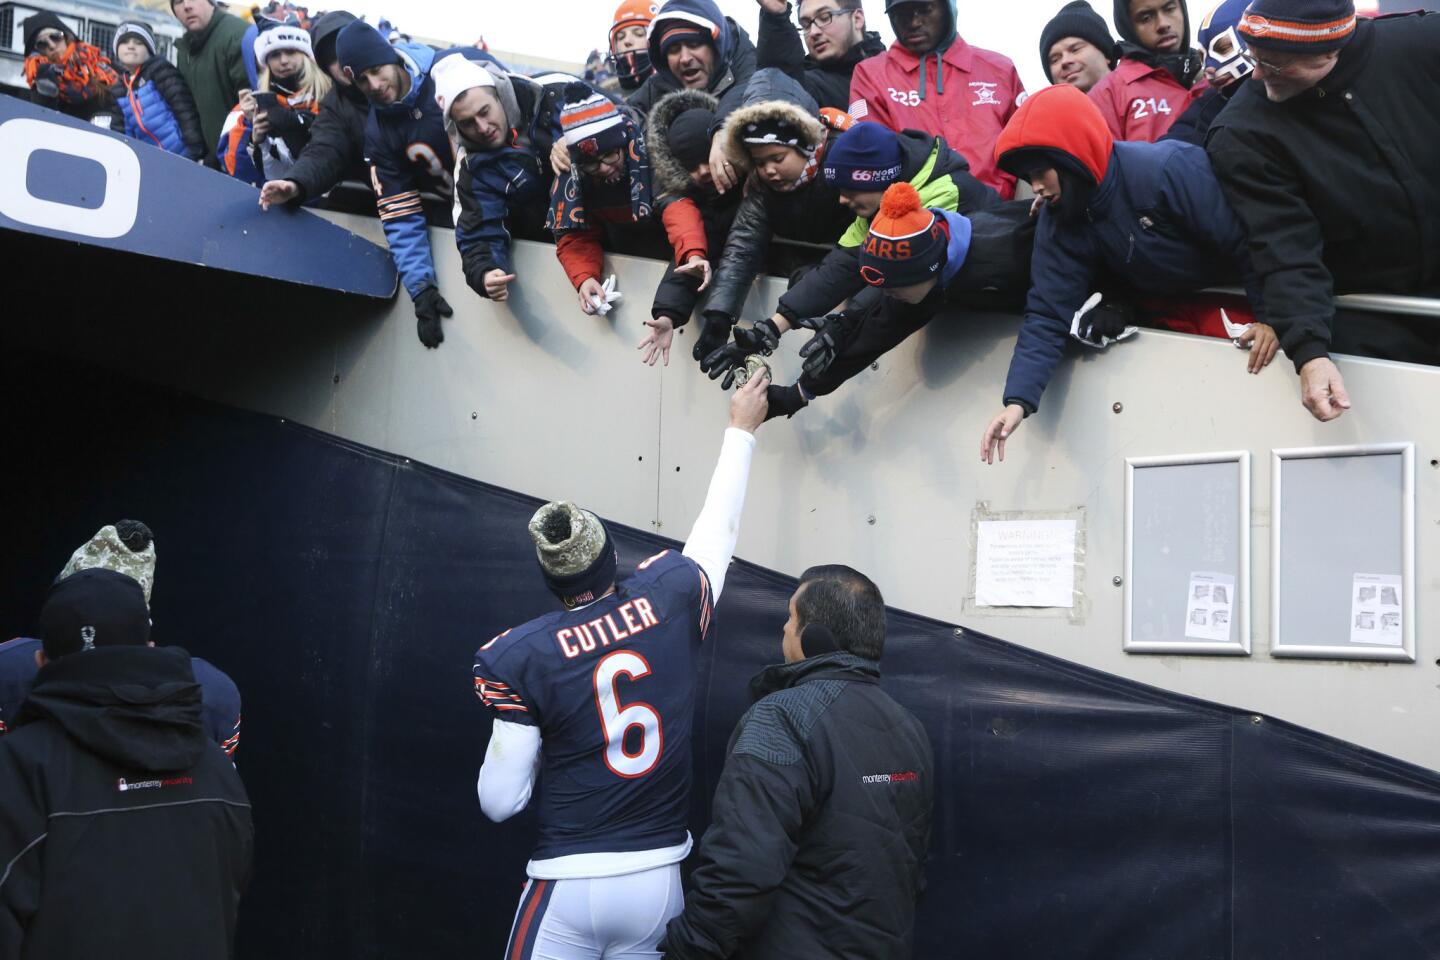 Chicago Bears quarterback Jay Cutler walks off the field after his team's loss to the Denver Broncos, at Soldier, Field, in Chicago, on Sunday, Nov. 22, 2015.